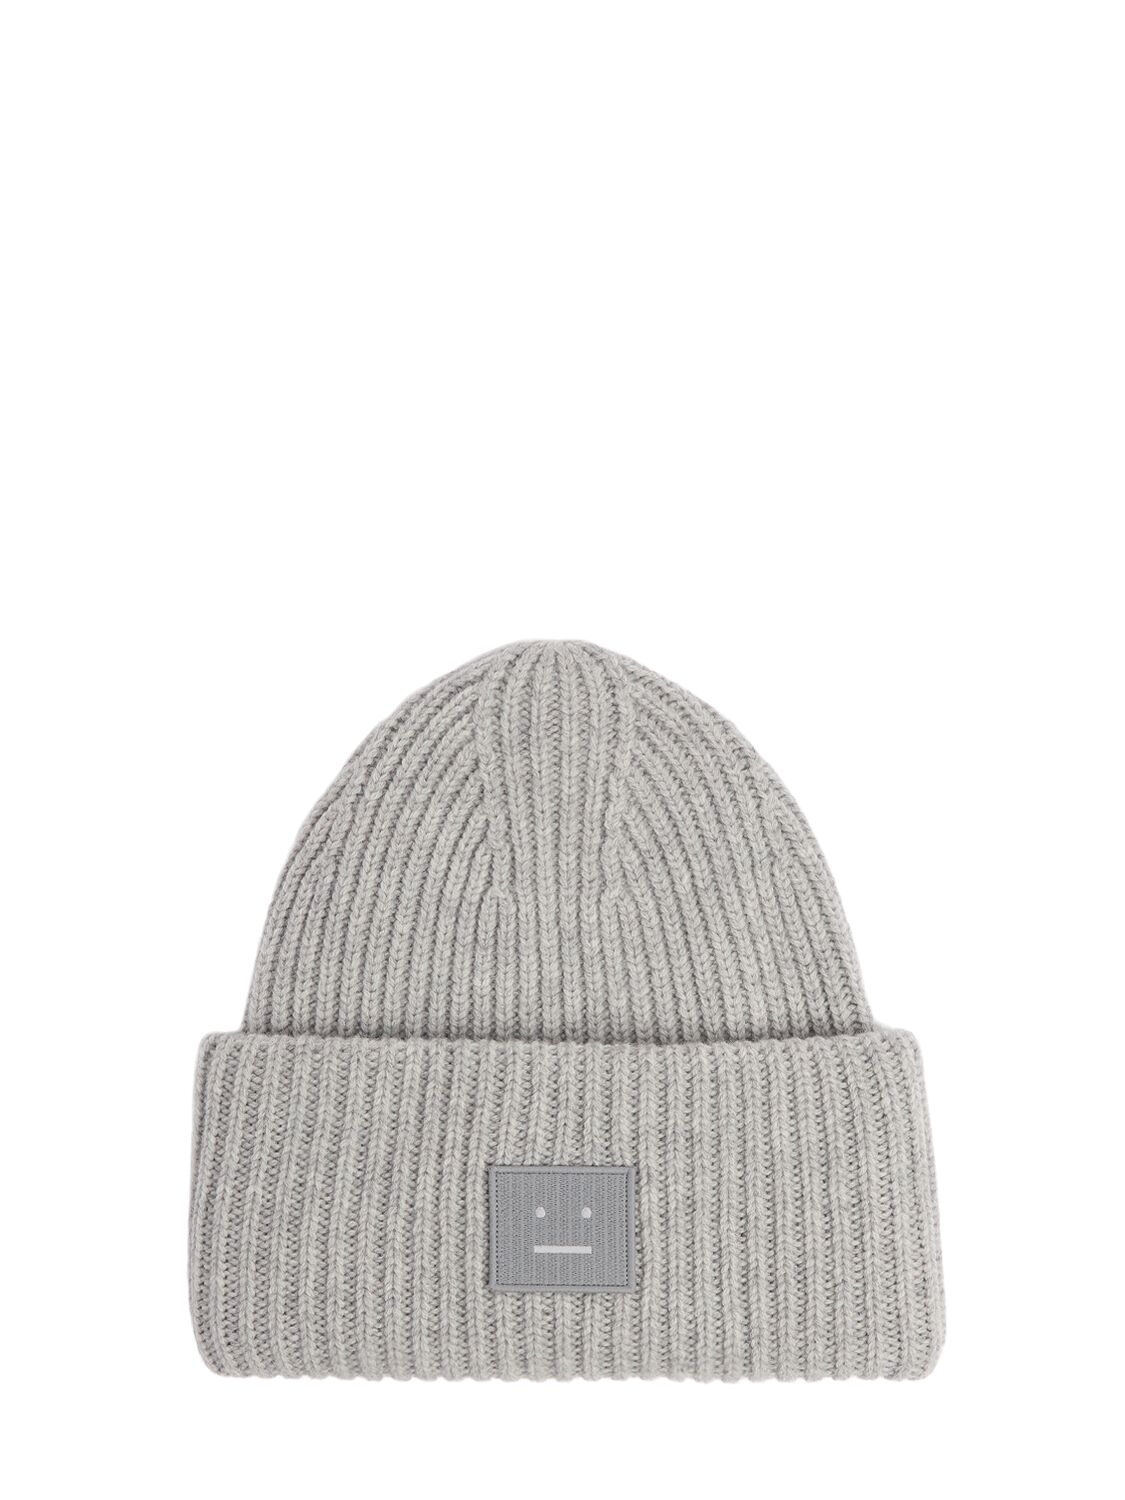 Acne Studios Pansy Wool Beanie In Gray